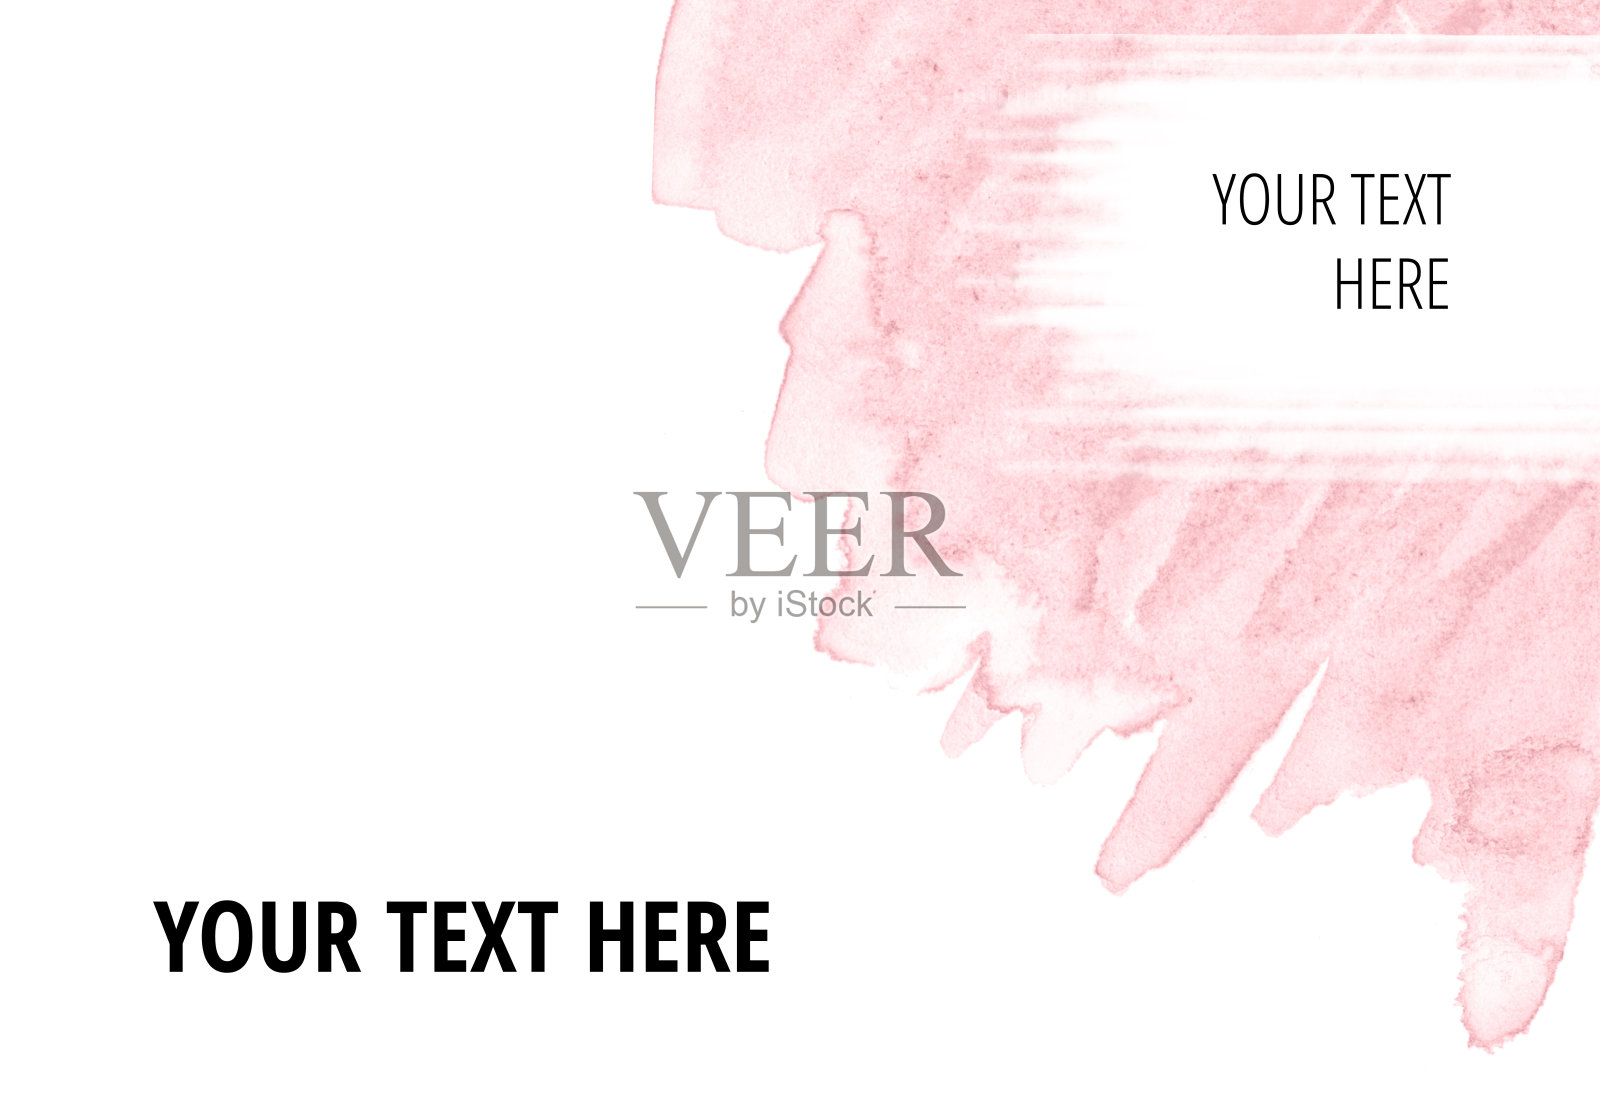 Paint Splashes frame on white background with copy space标为'Your text here'照片摄影图片